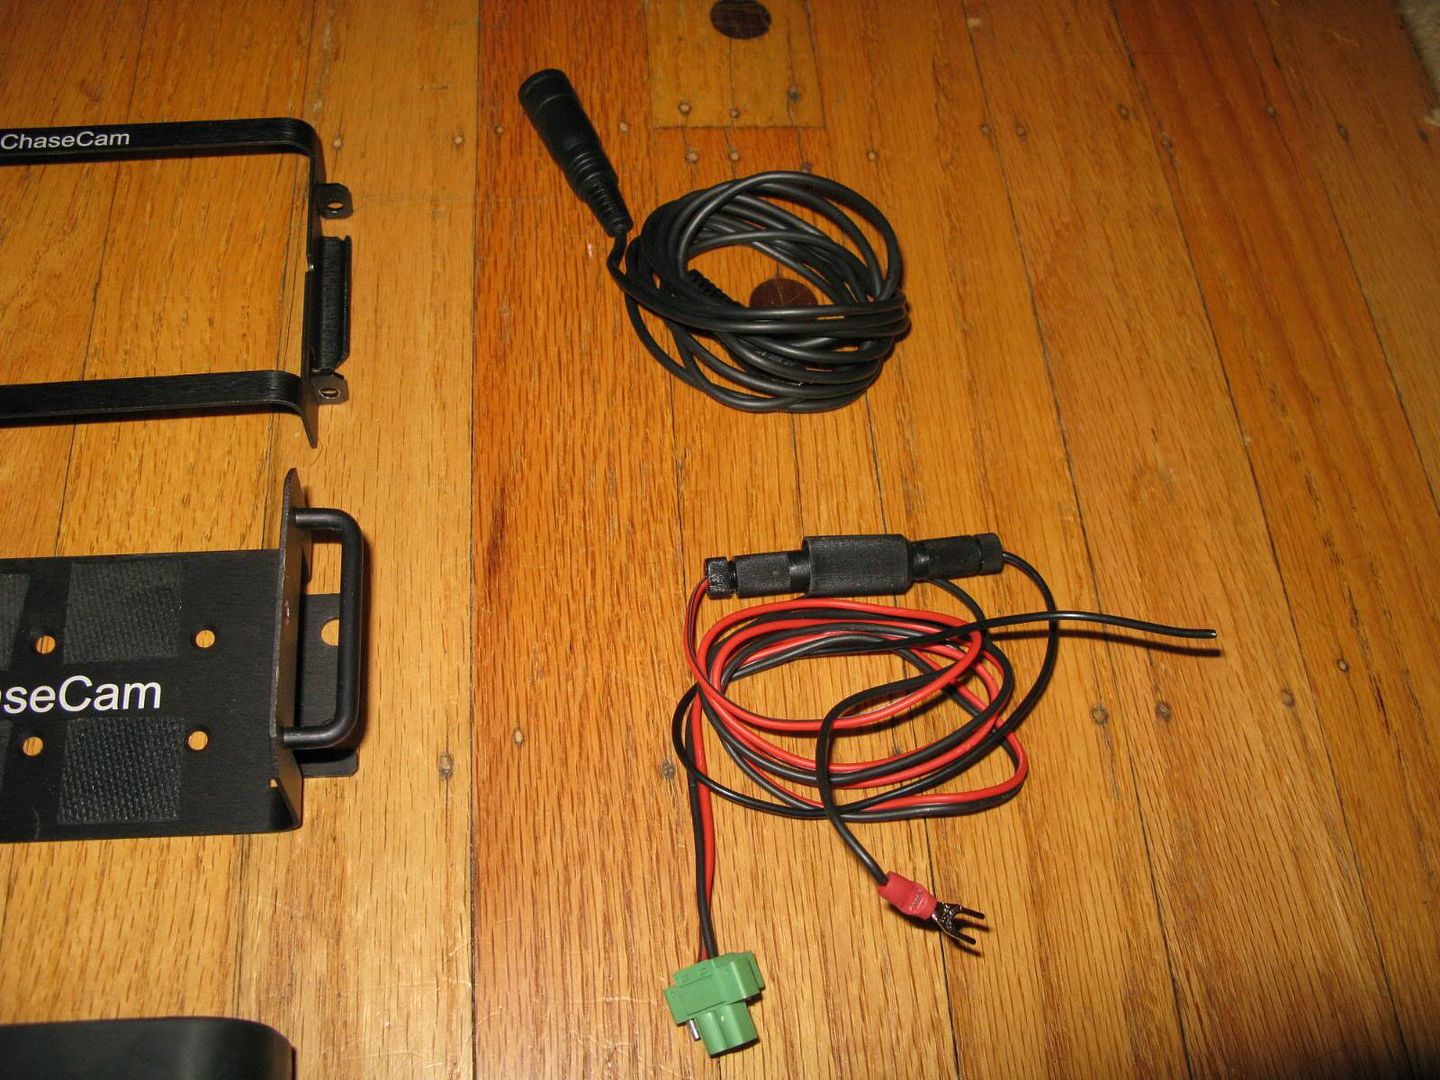 FS: ChaseCam Video Recording System